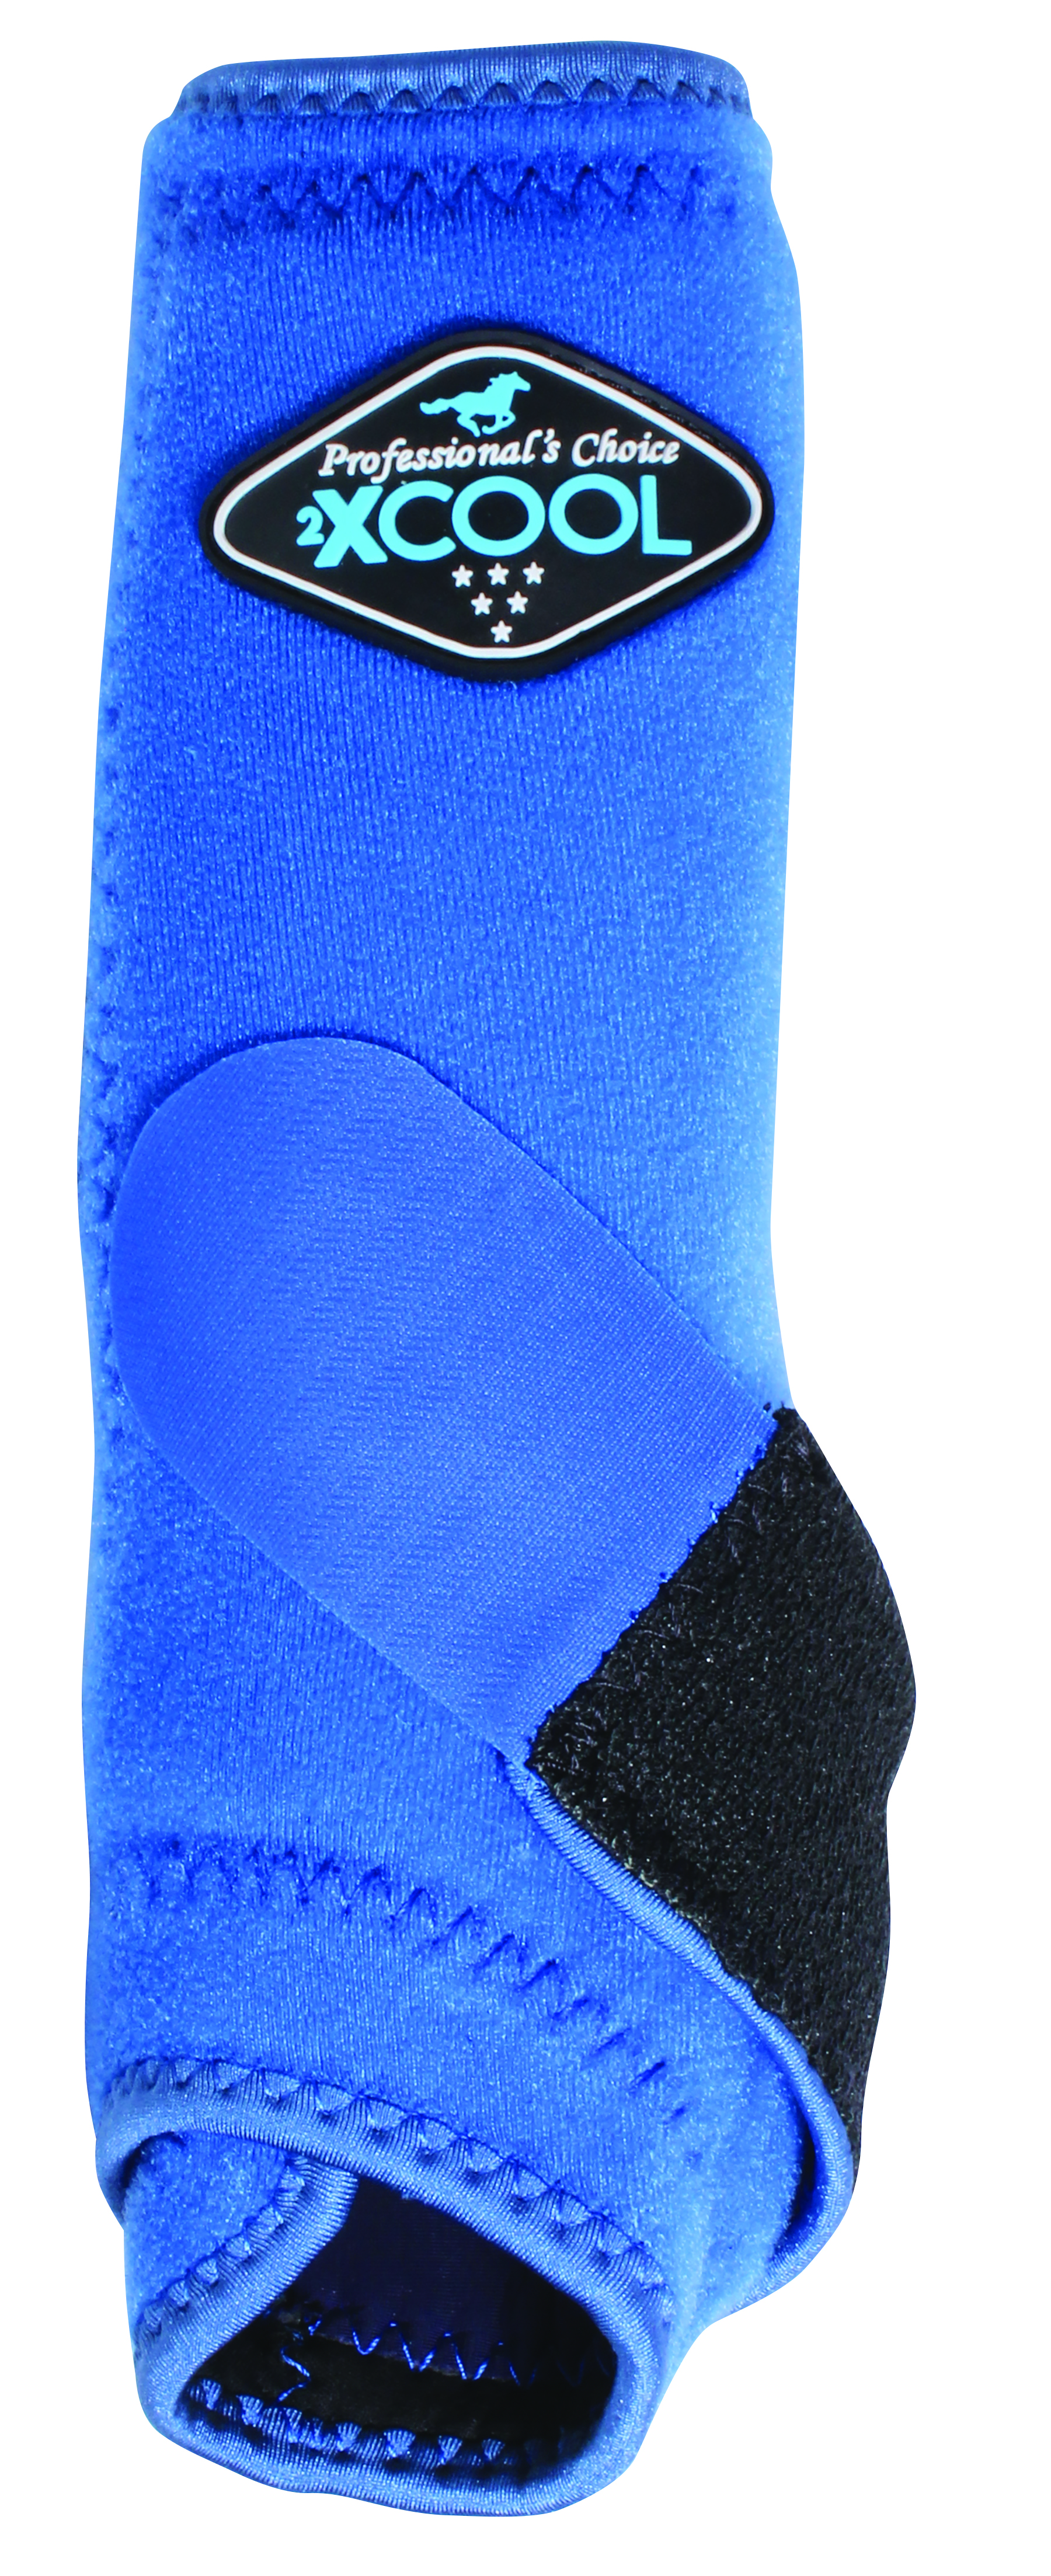 Stinchiere Easy-Fit Splint Boots Professional’s Choice 